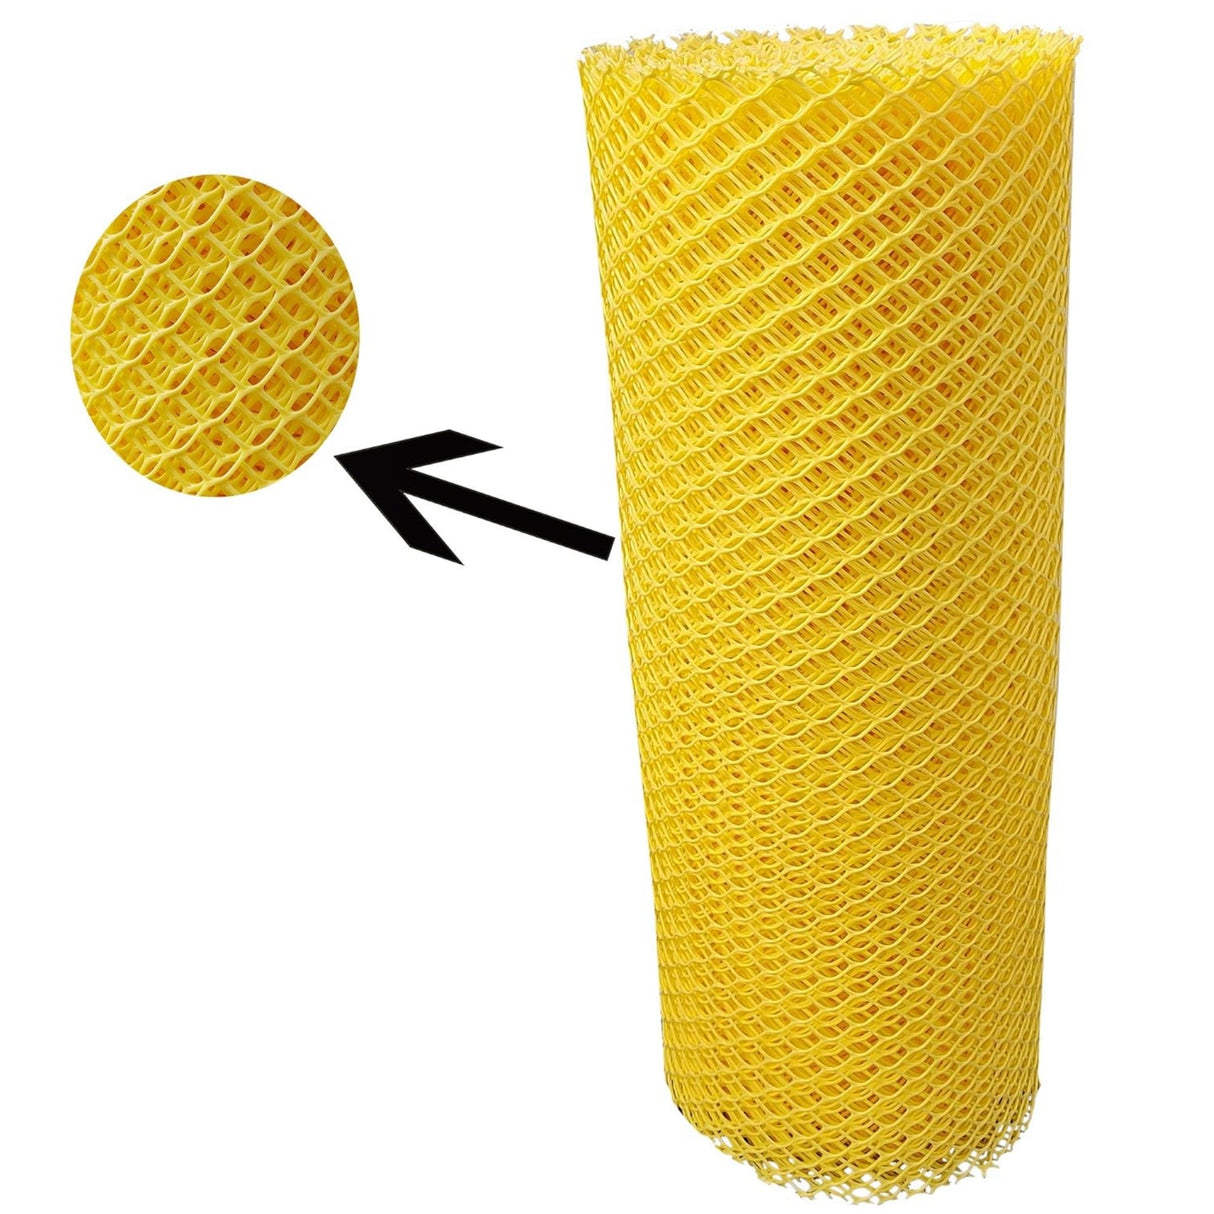 Tree Guard Net, Garden Fencing Net Virgin Plastic Yellow Color with 1 Cutter and 50 PVC Tag